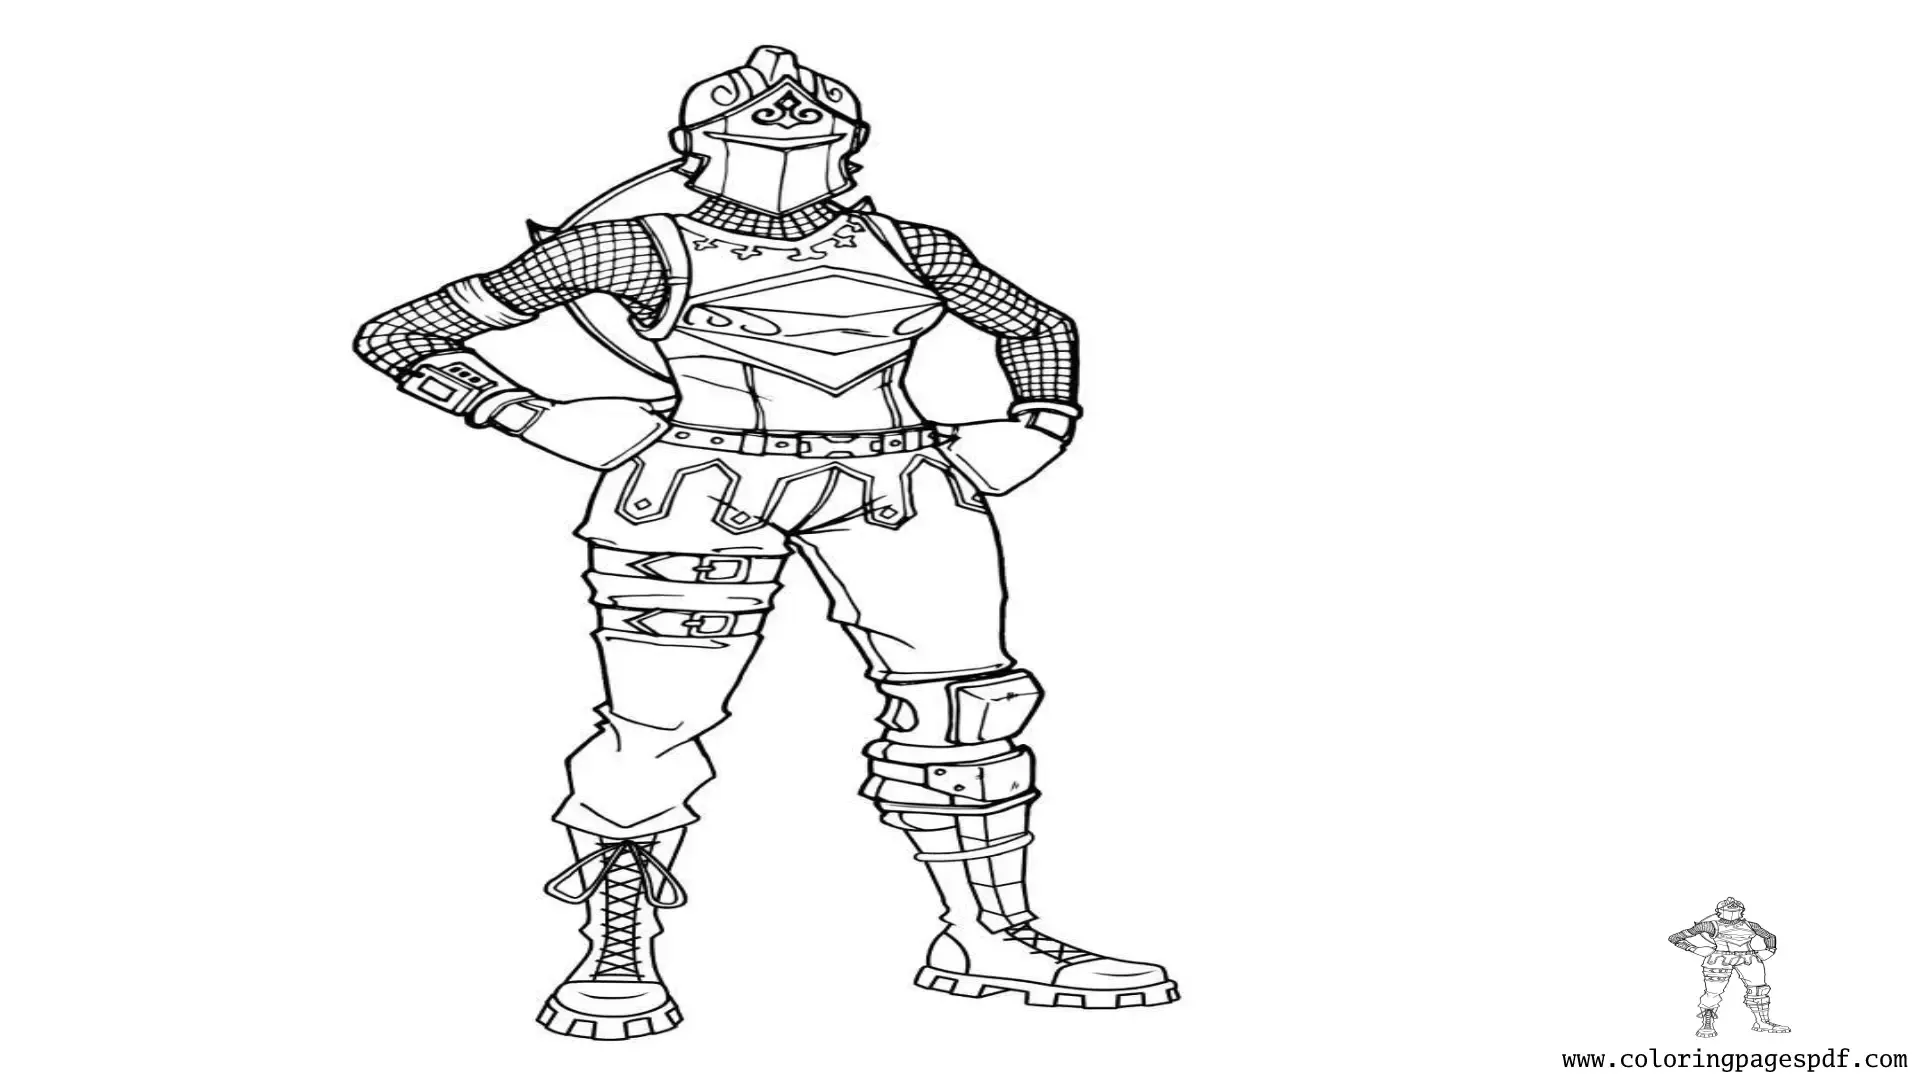 Coloring Page Of Fortnite Red Knight Skin